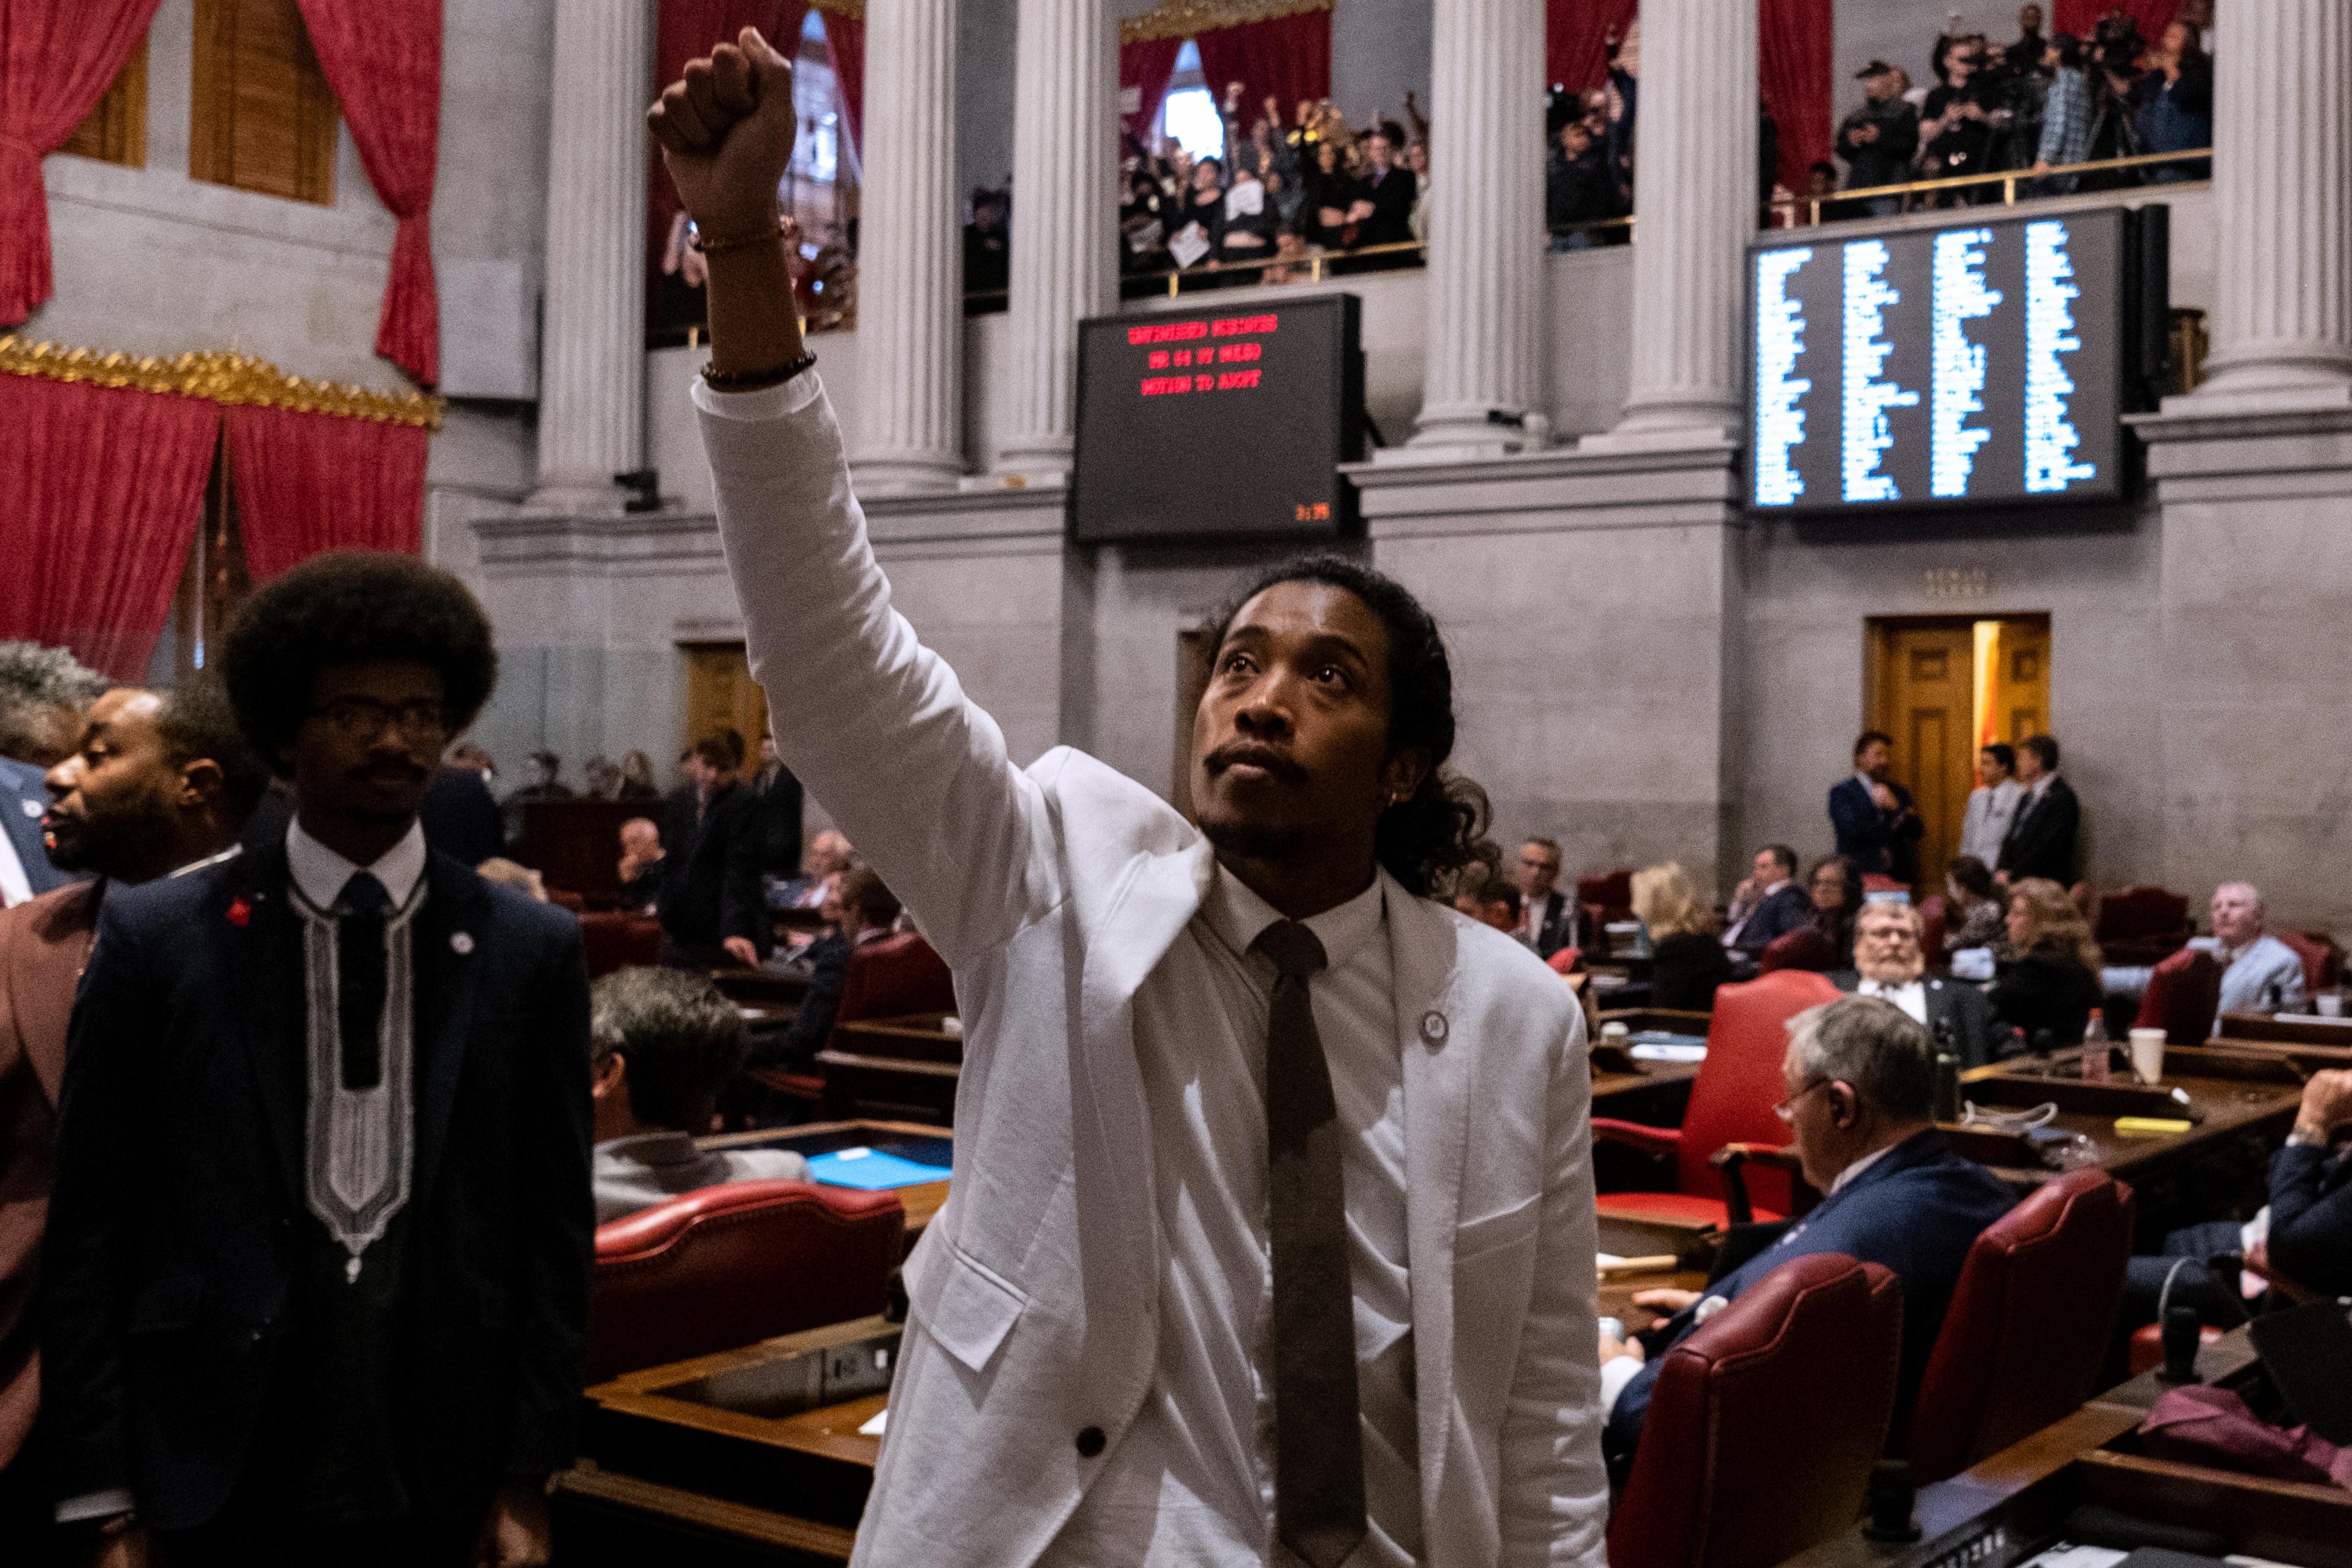 In the center of the frame, a Black man in a light suit, white shirt and brown tie stands with one fist raised on the State Capitol floor. To the left, a Black man in a blue suit looks on. Screens with the vote totals can be seen on the wall behind them, and other lawmakers are sitting and standing throughout the chamber in the background.